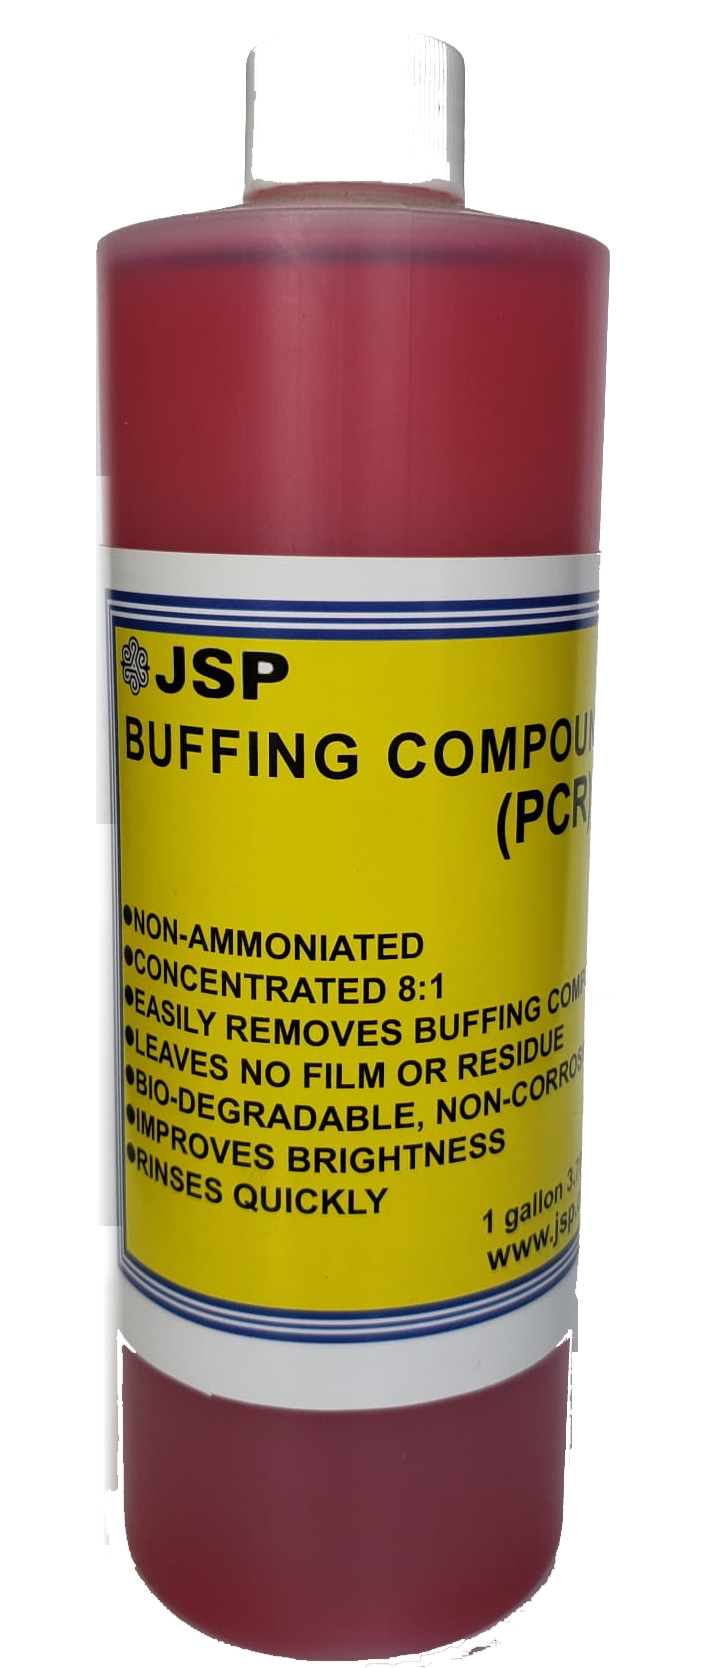 BUFFING COMPOUND REMOVER, 16 ounces - Click Image to Close